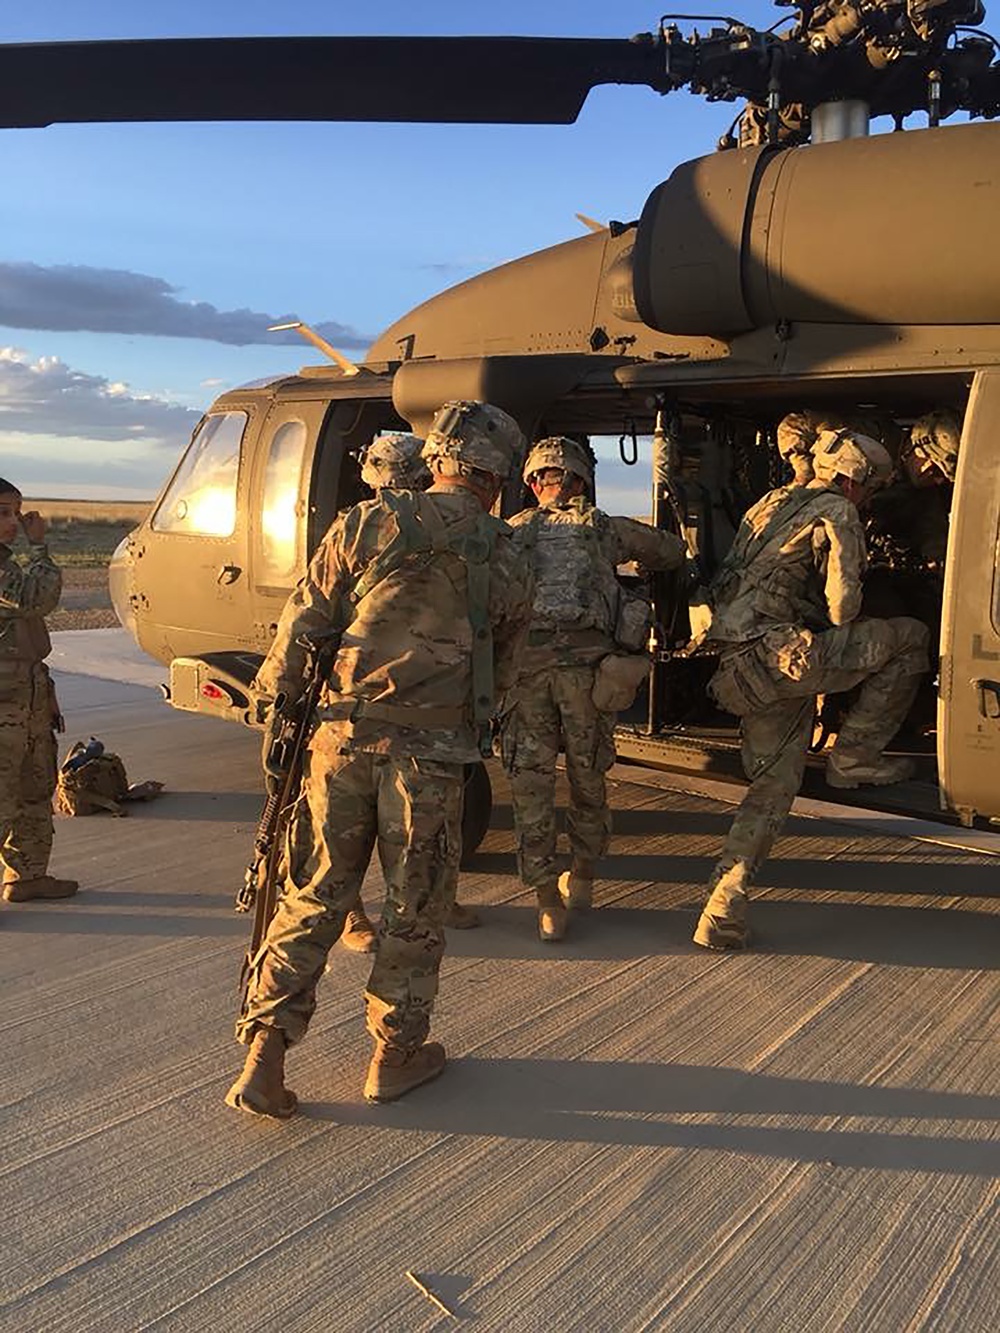 Iron Strike 18: Troops participate in PCMS training exercise